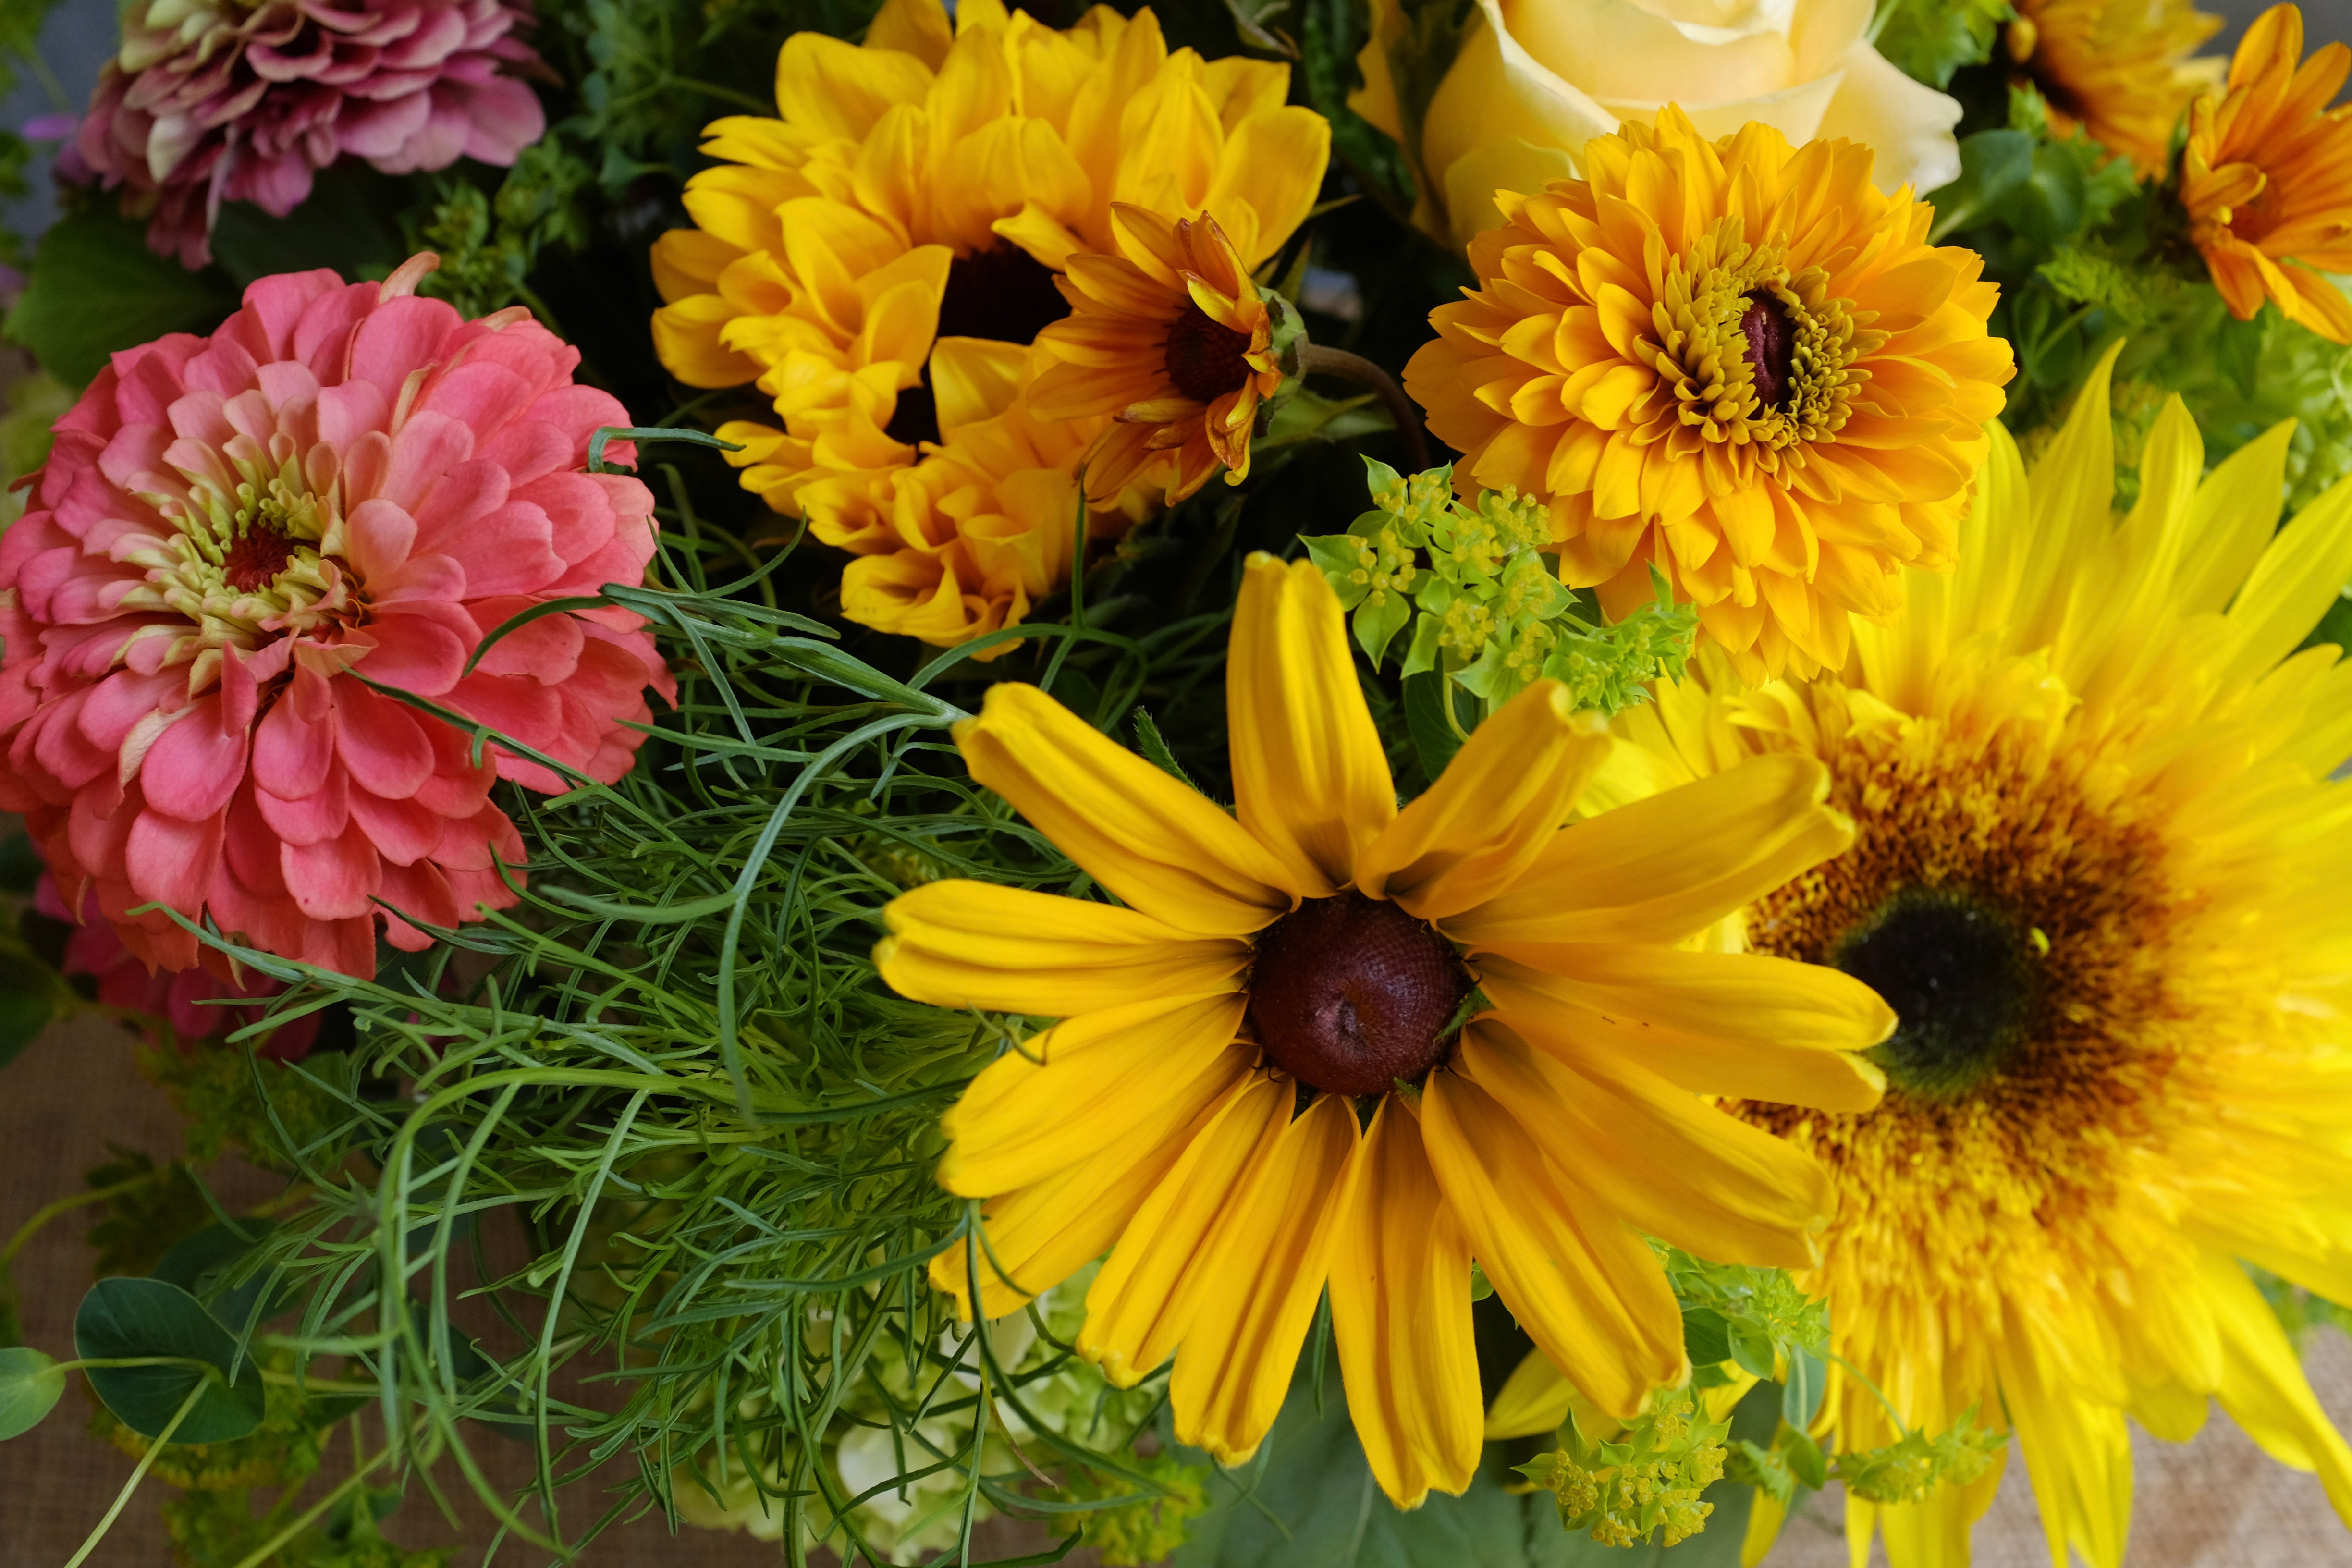 Local Zinnias and Sunflowers from Greenhouse 17 at Michler's Florist